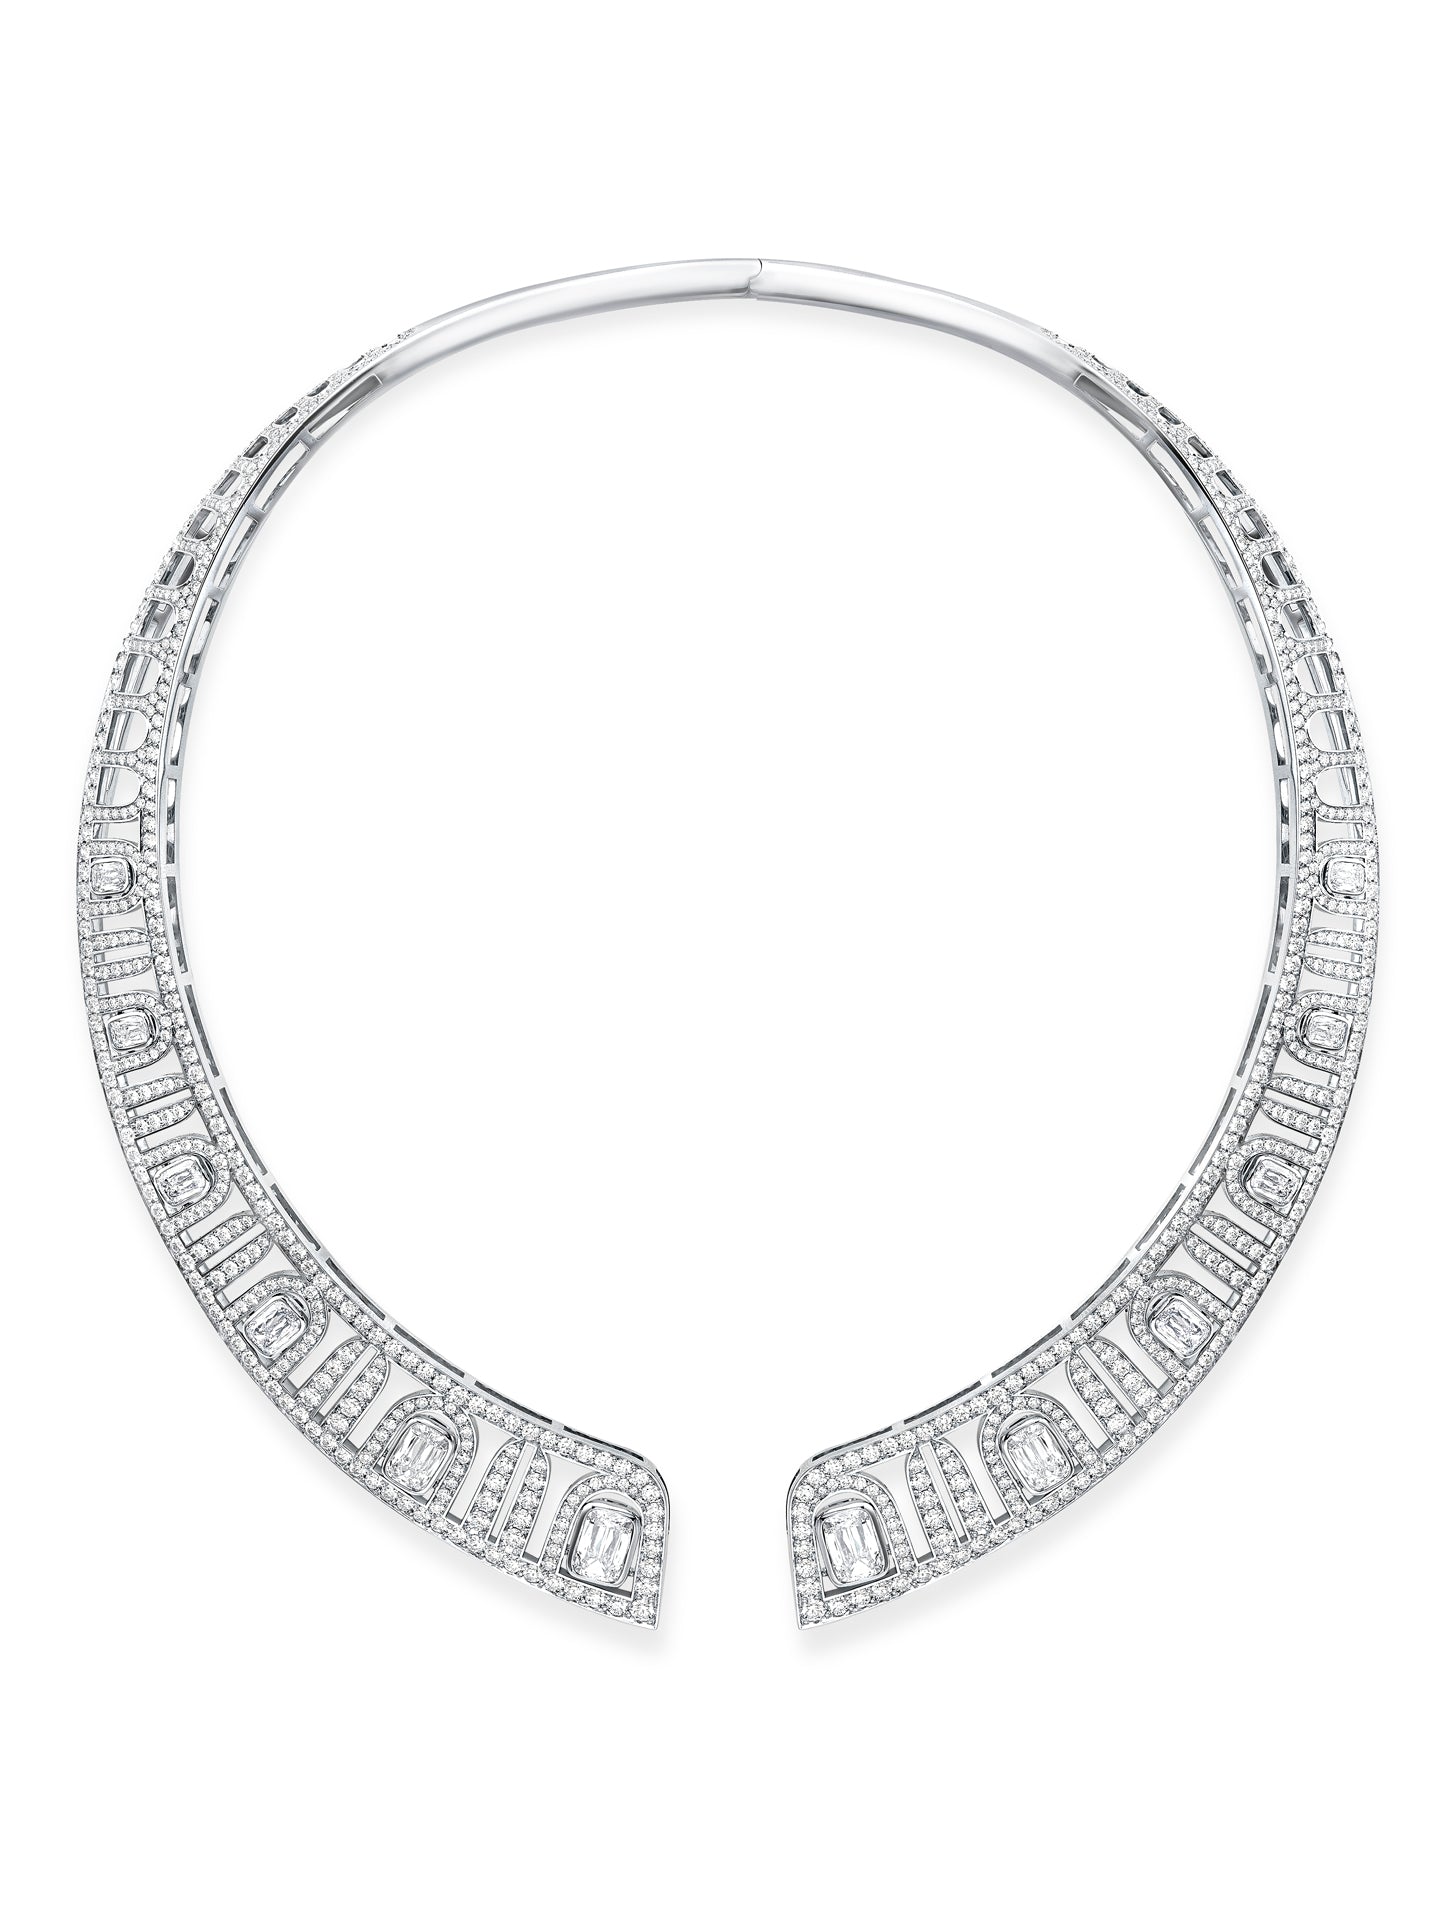 Boodles x The National Gallery Perspective Collar | Boodles